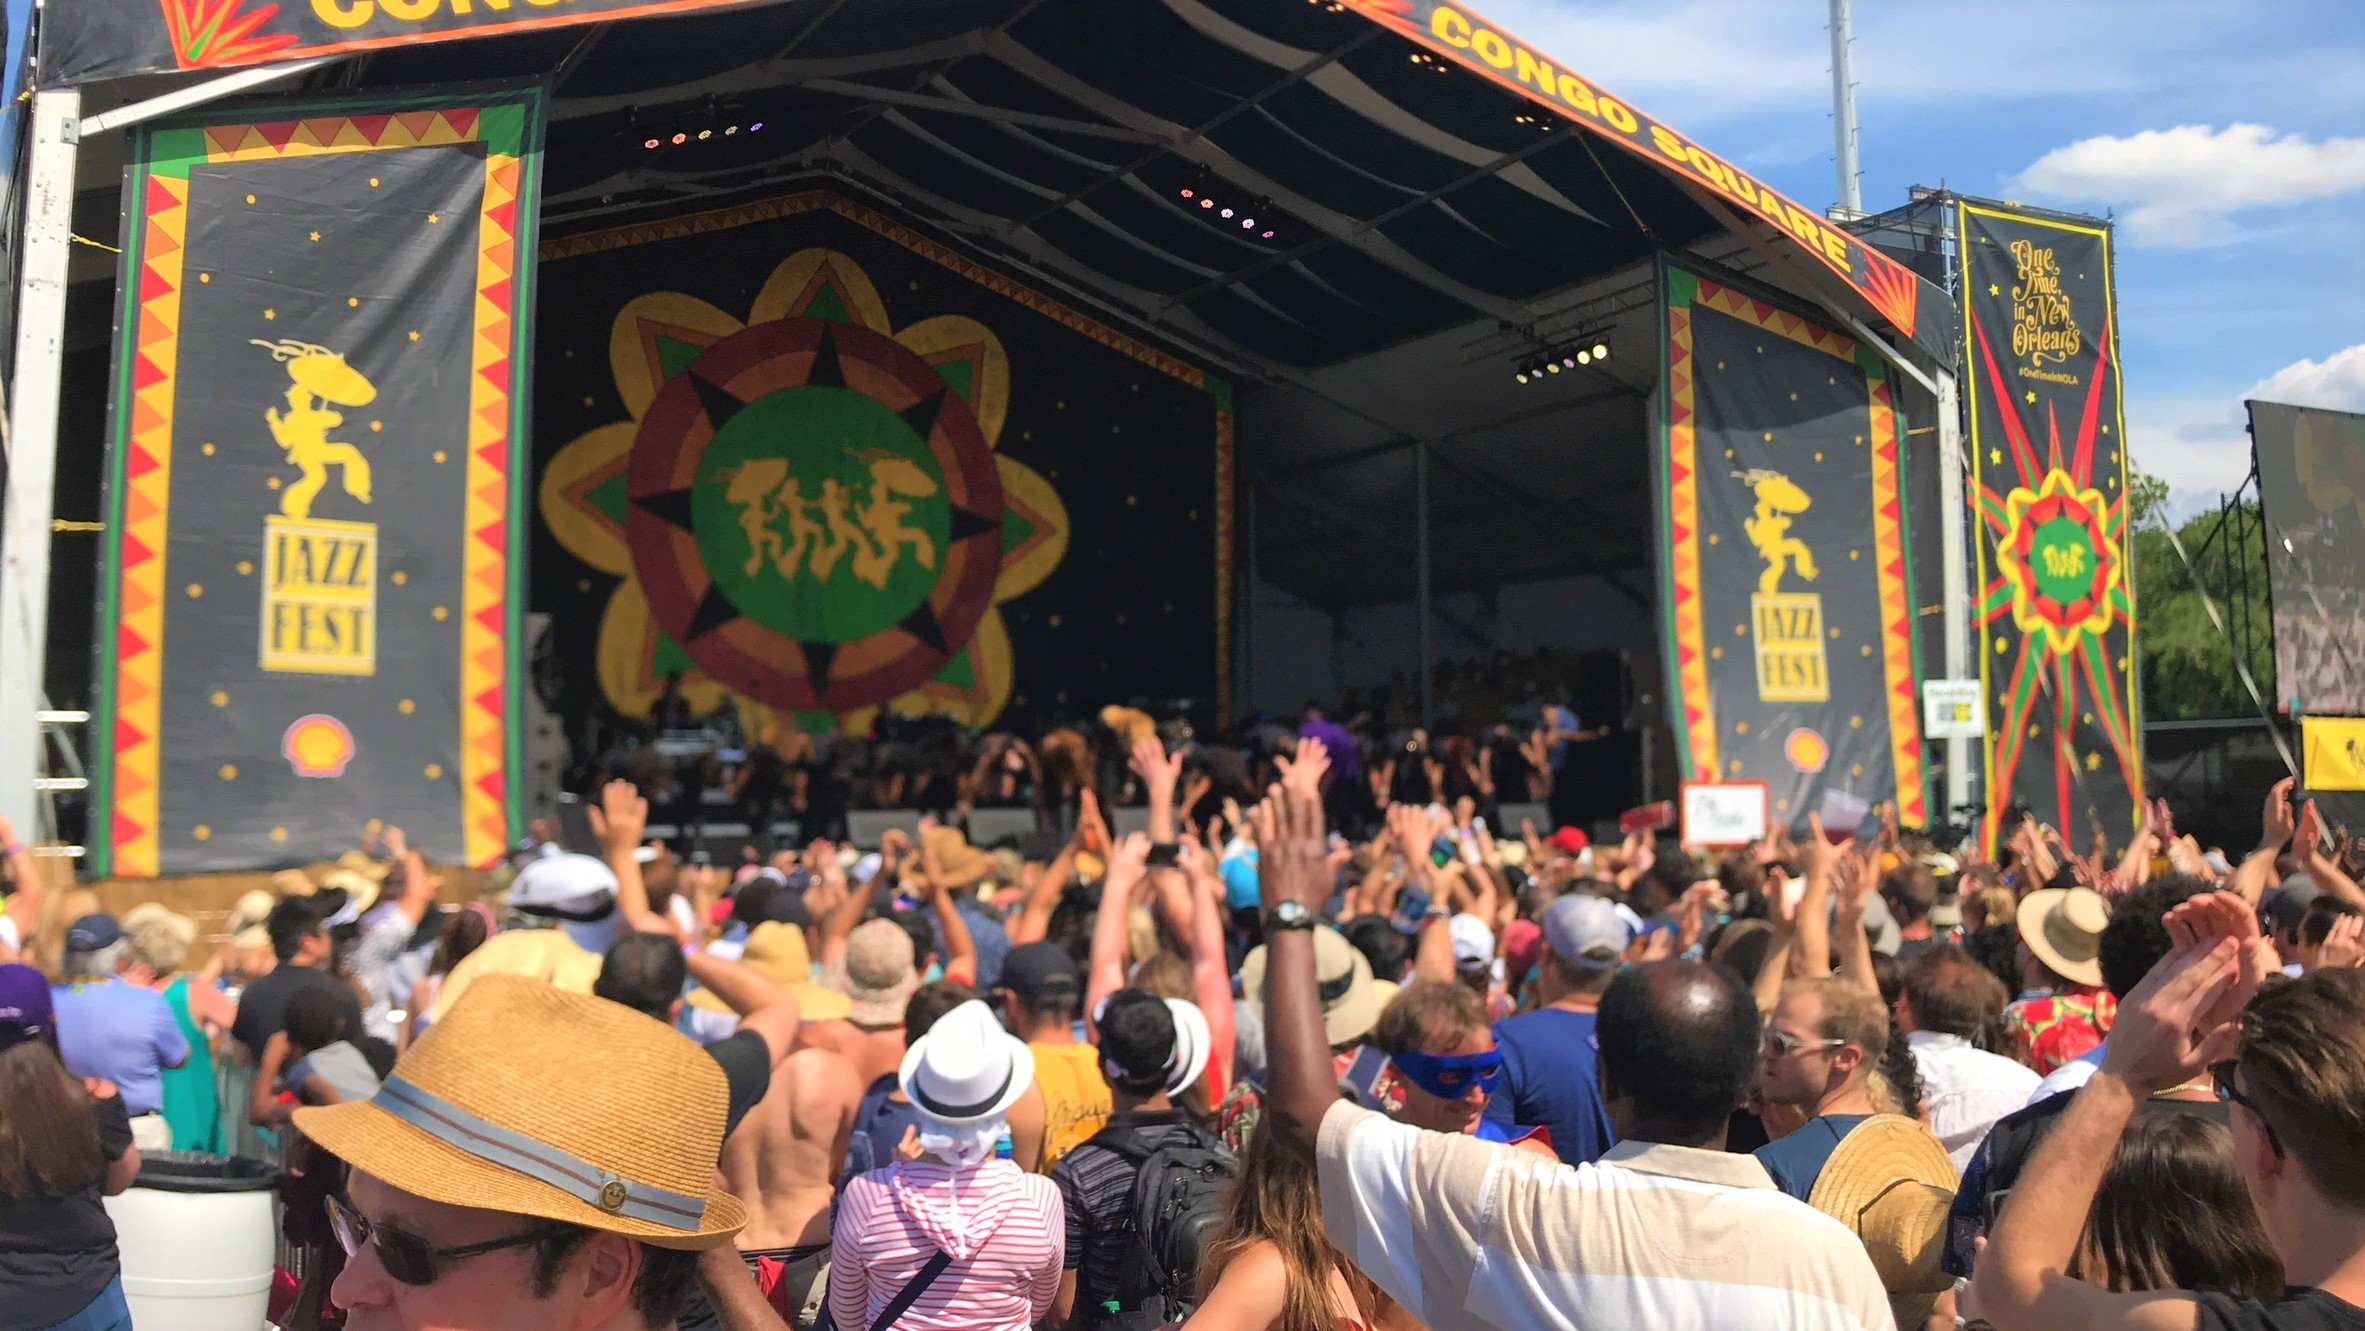 Jazz Fest 2022: the complete daily music